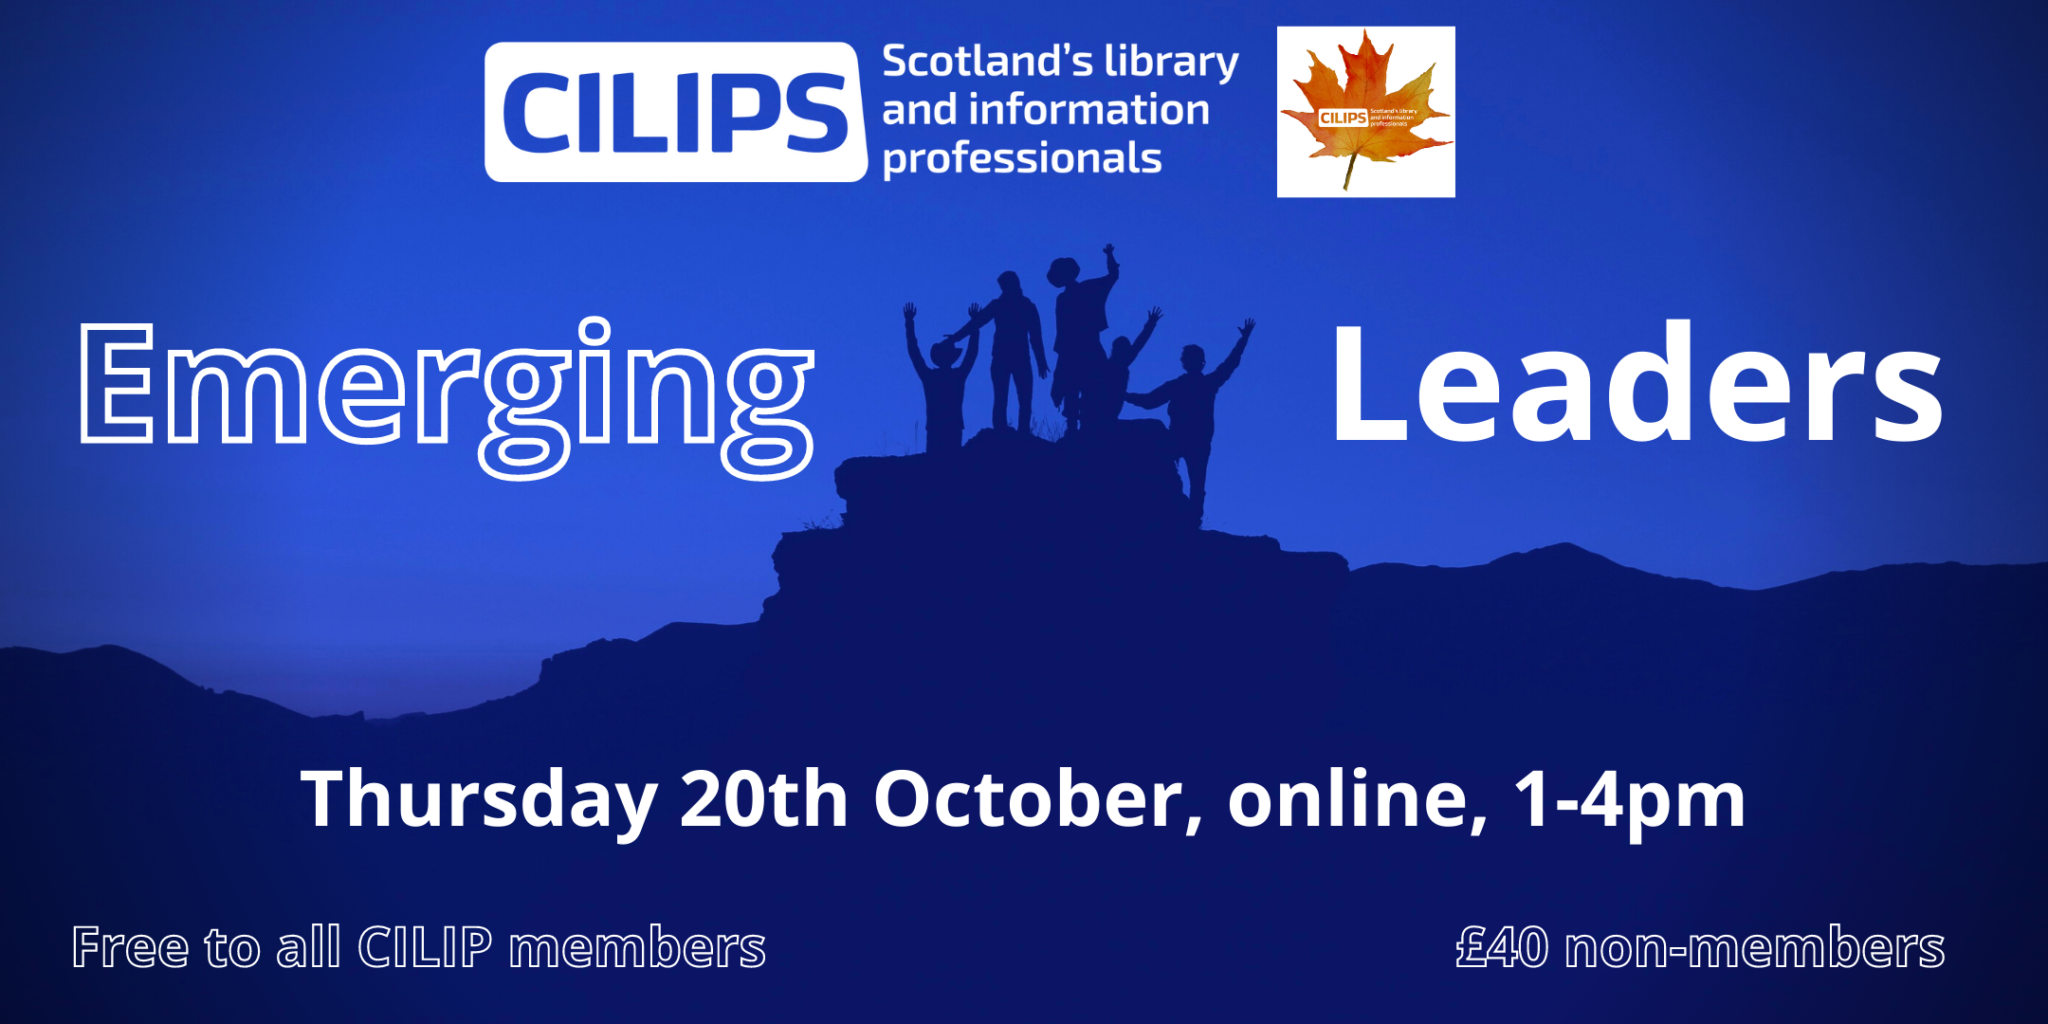 CILIP: the library and information association